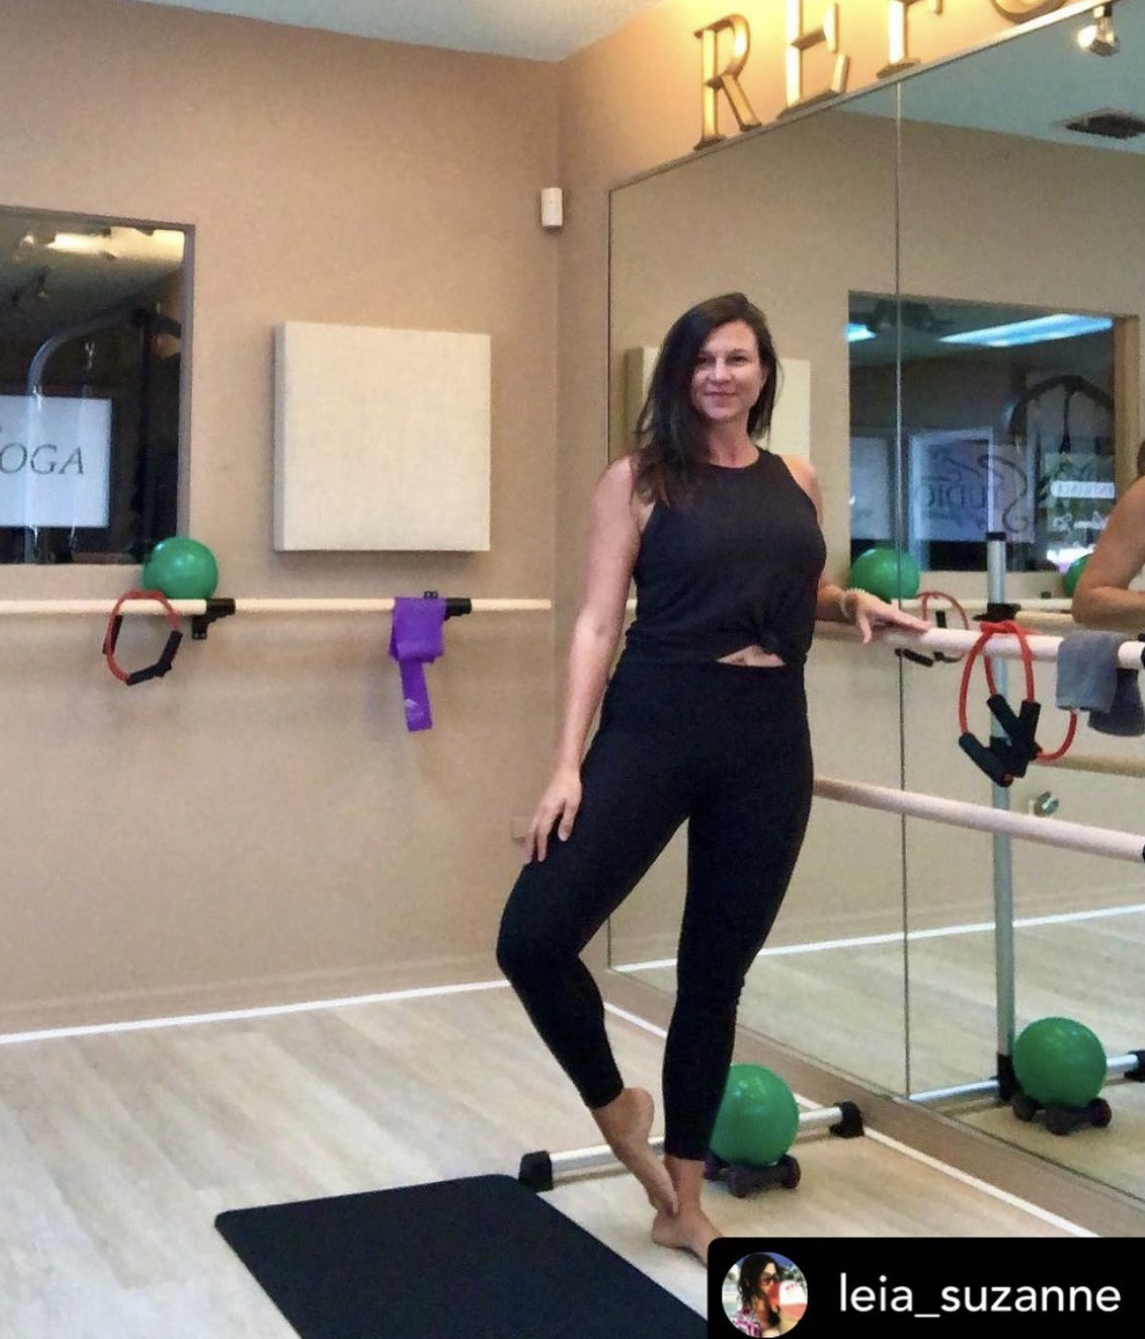 About Barre Certification  Barre Instructor Training and Certification  Program